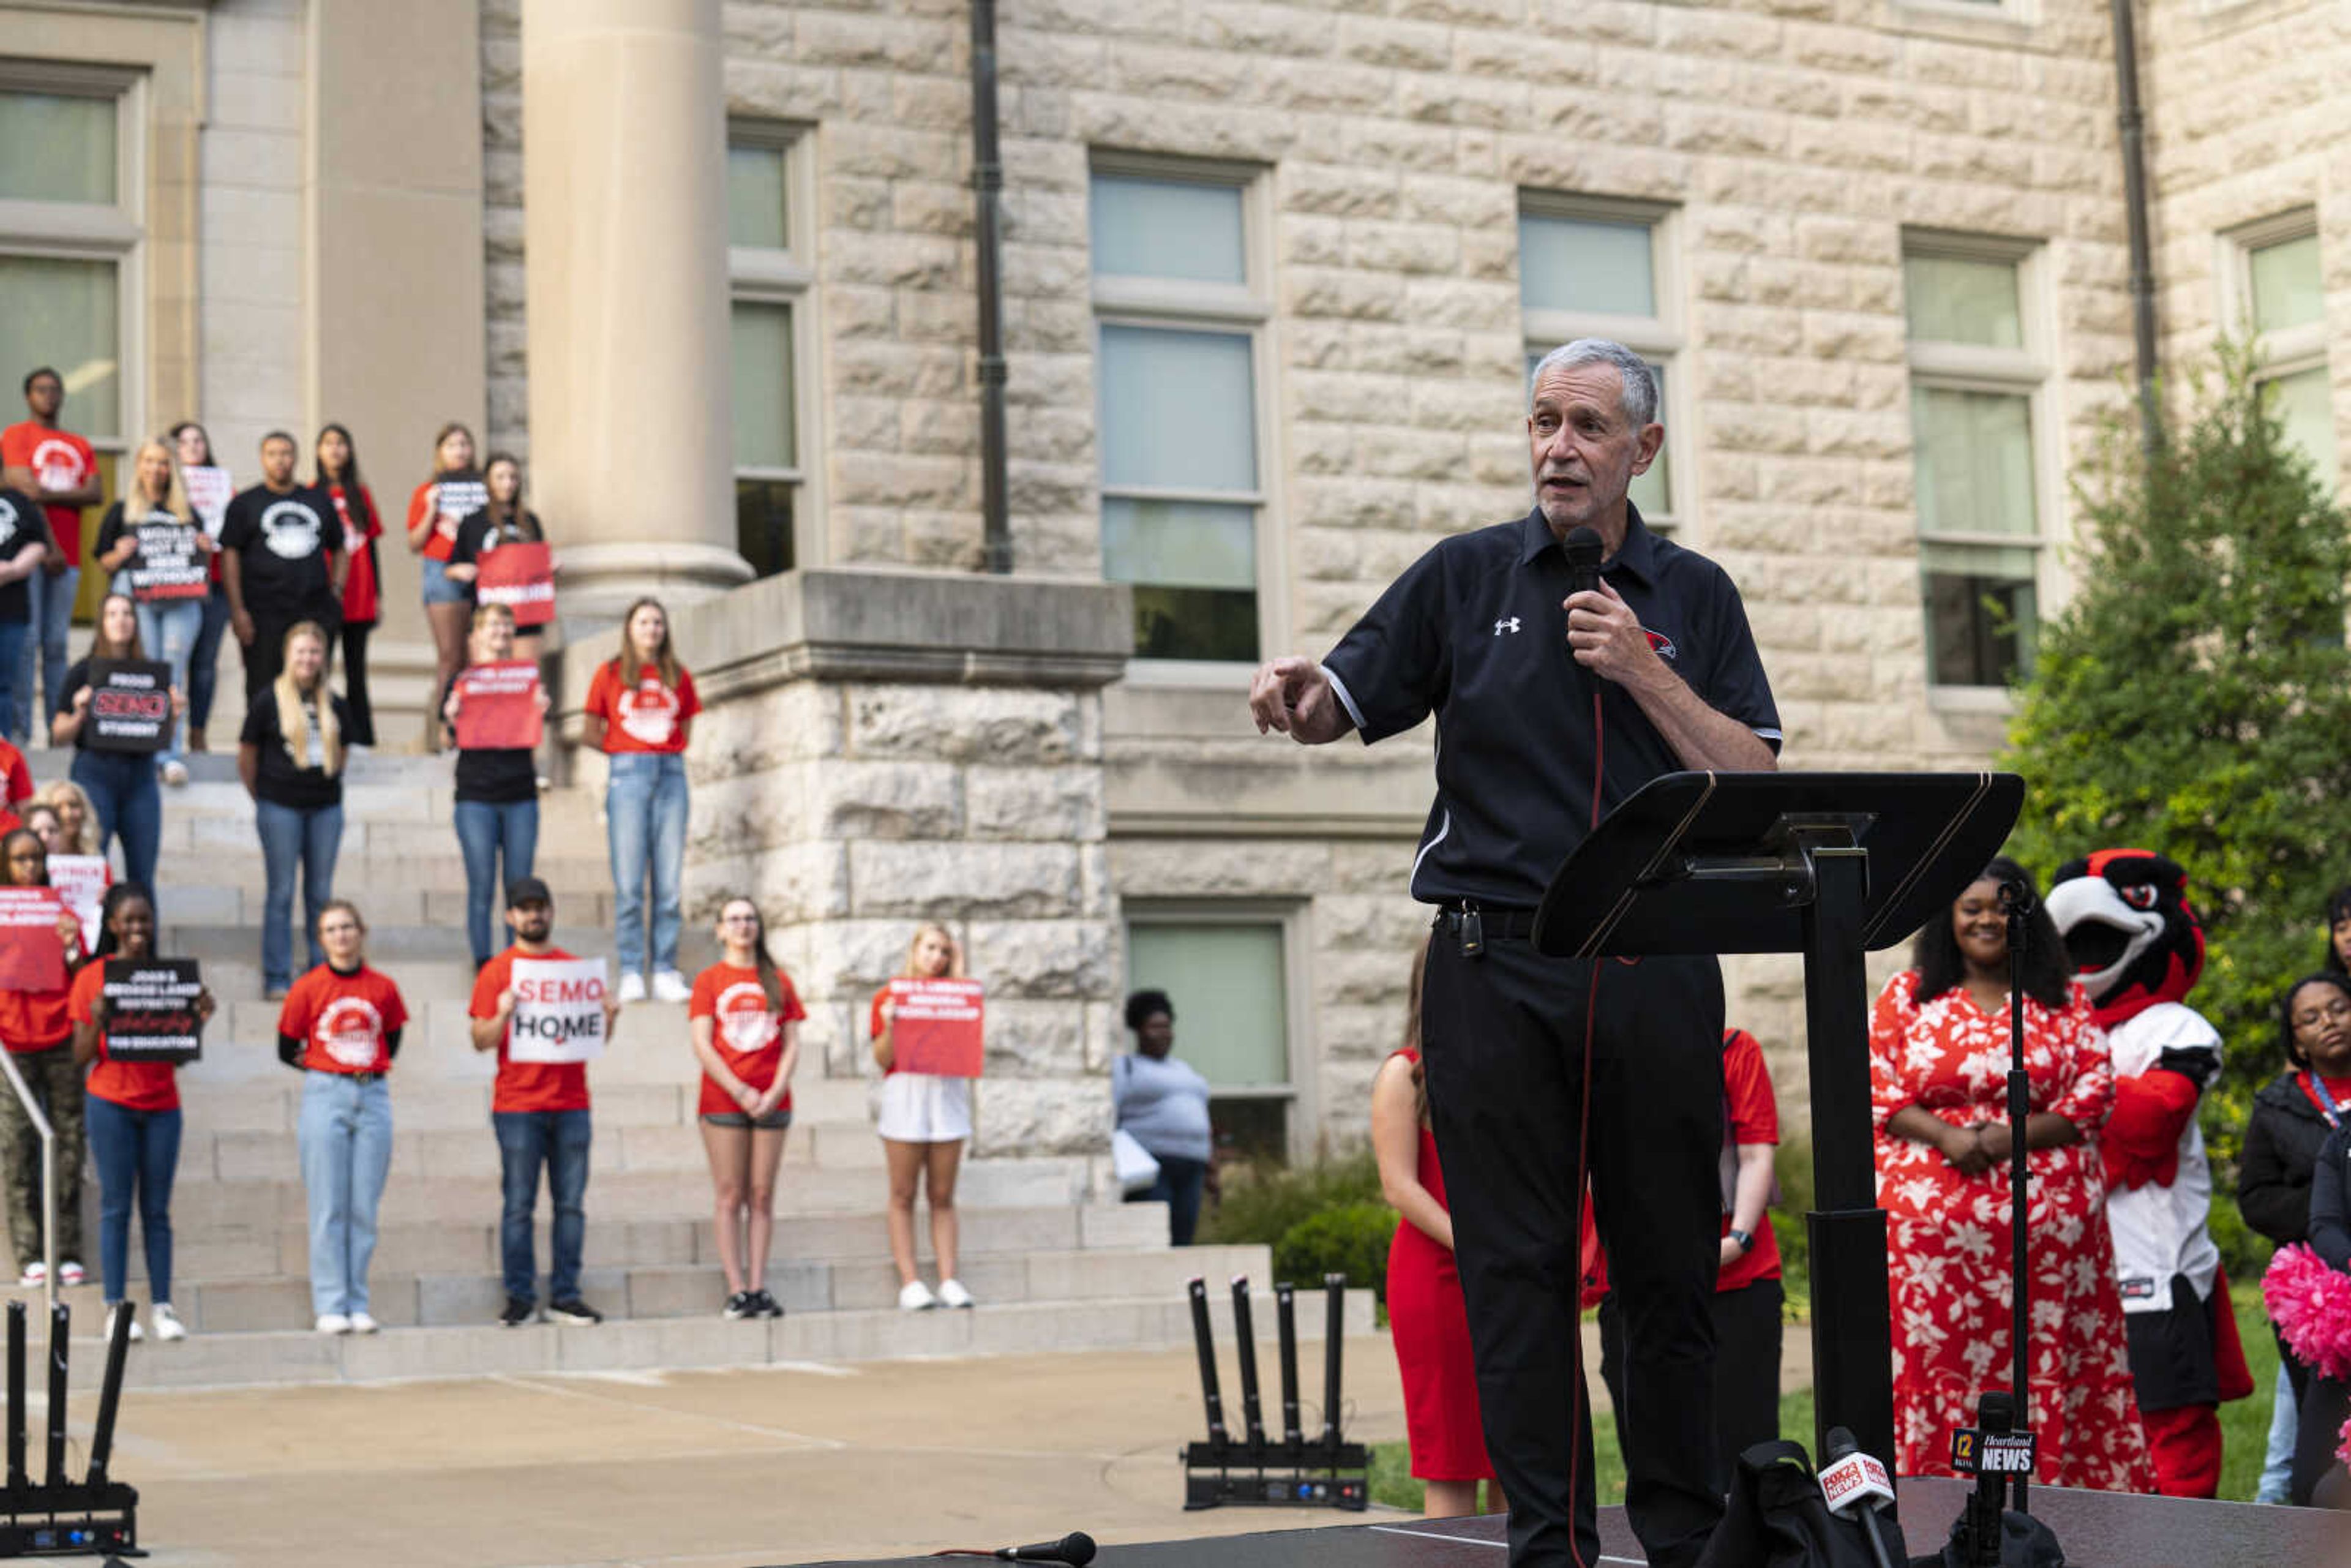 Southeast Missouri State University president Vargas announces launch of largest comprehensive funding campaign at Homecoming Kickoff Block Party